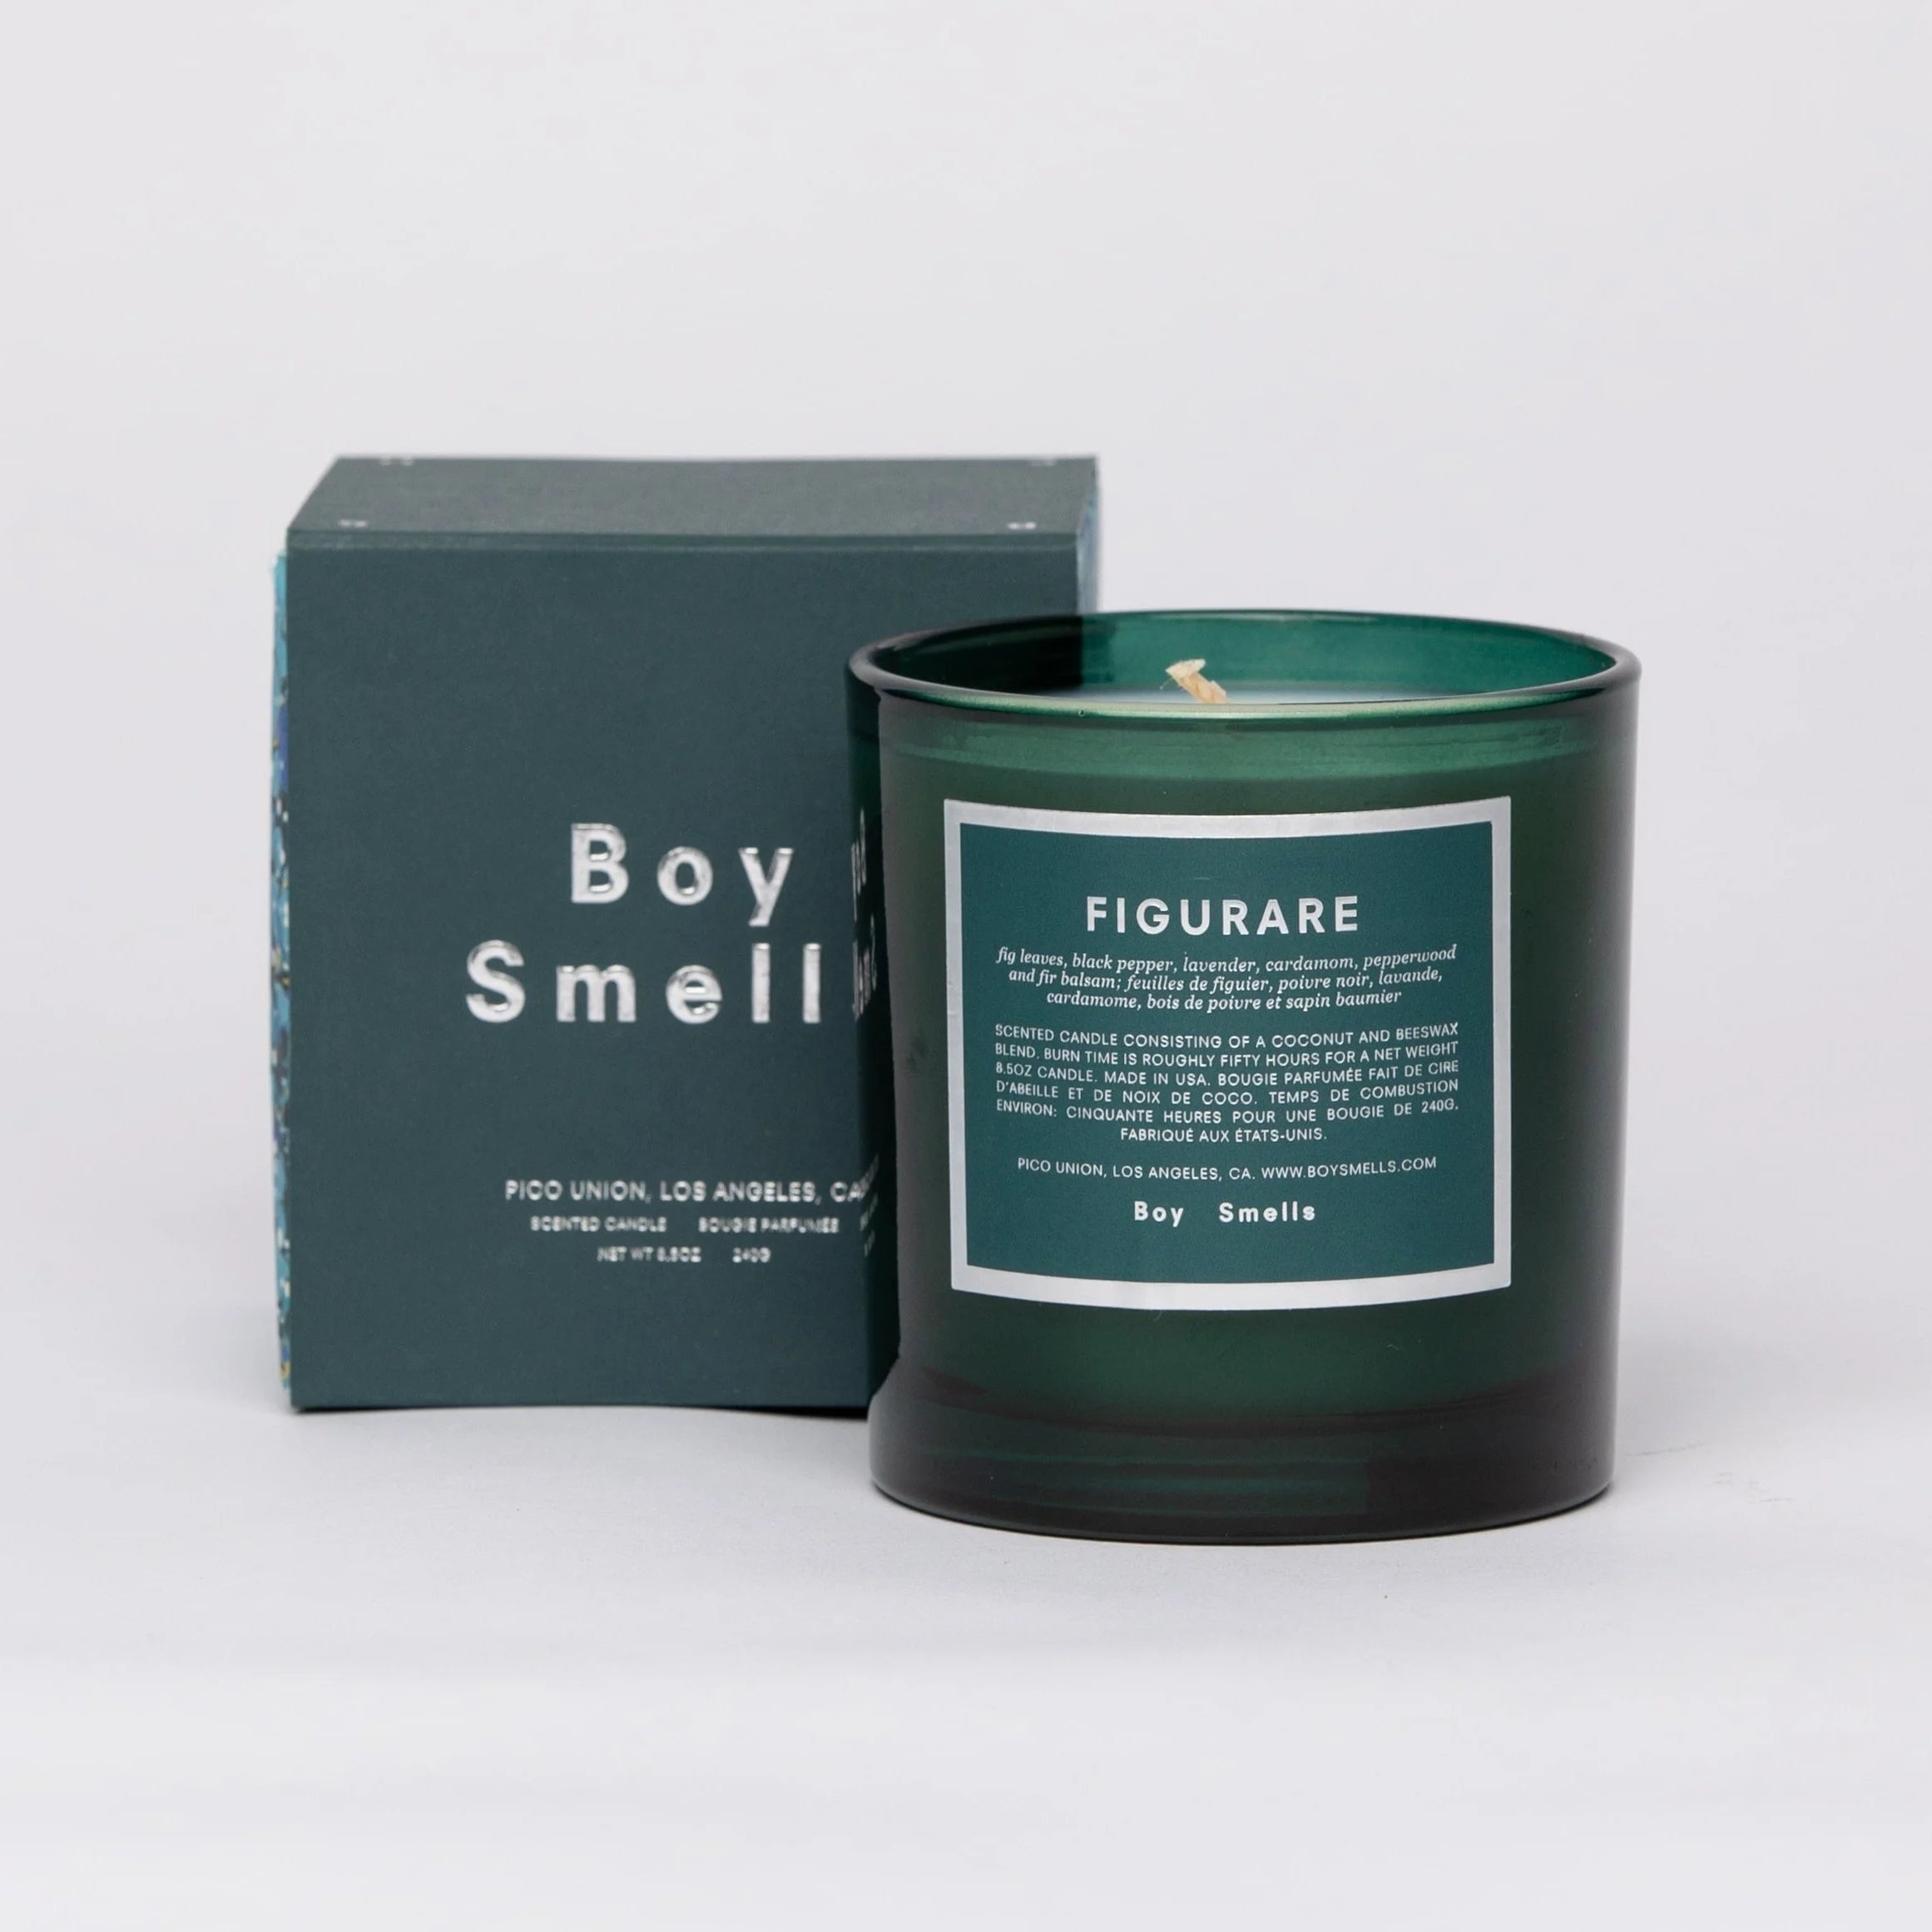 Boy Smells Figurare Scented Candle